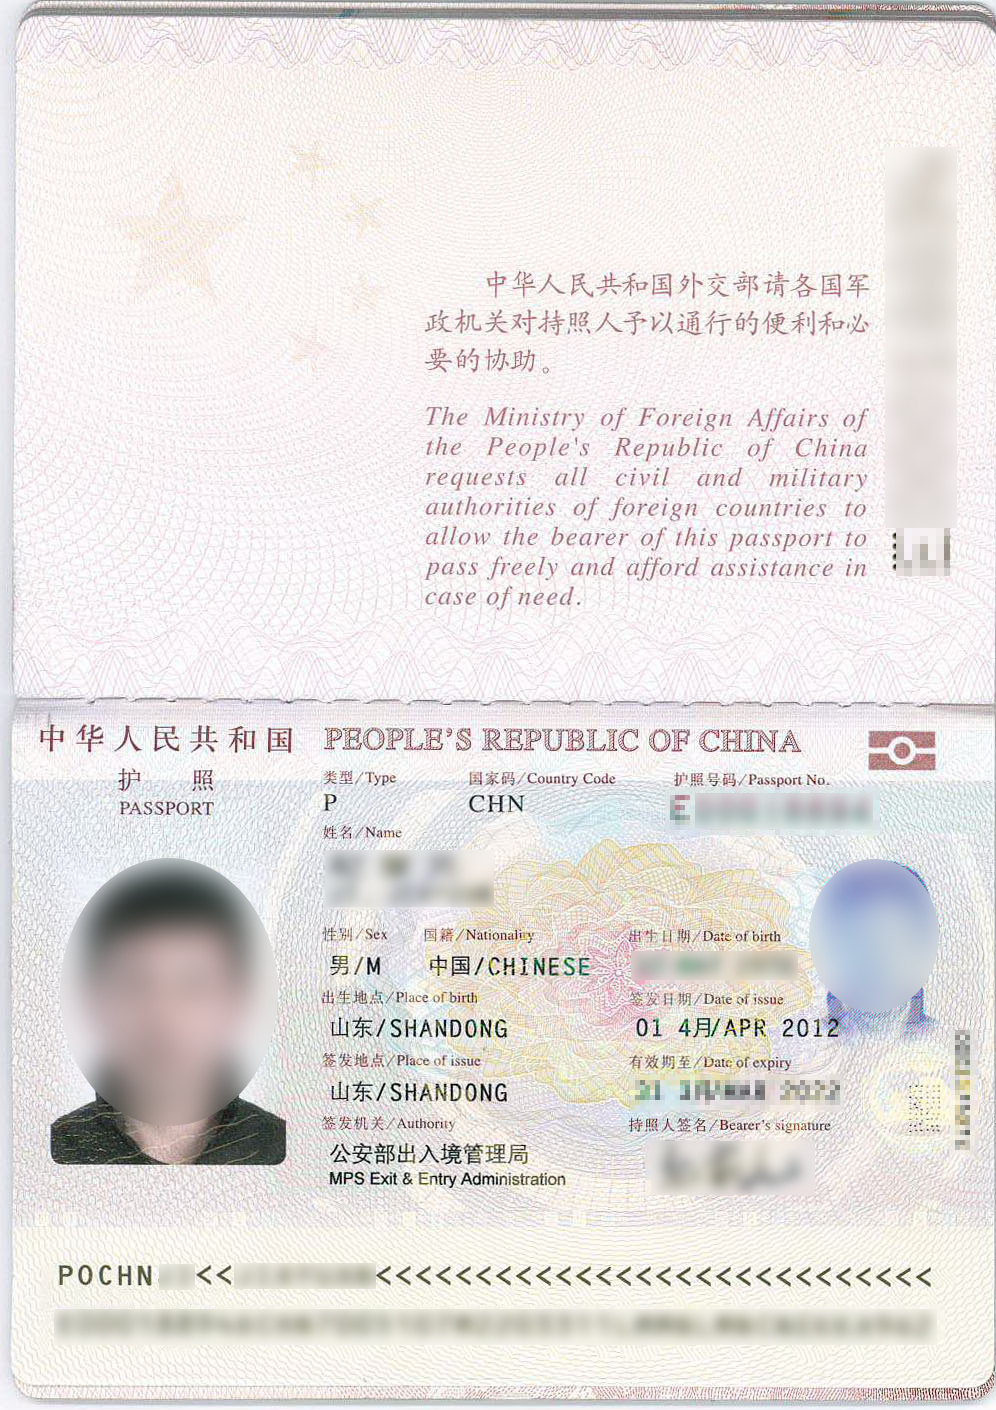 That Chinese Passport Story Sure Looks Like A Hoax